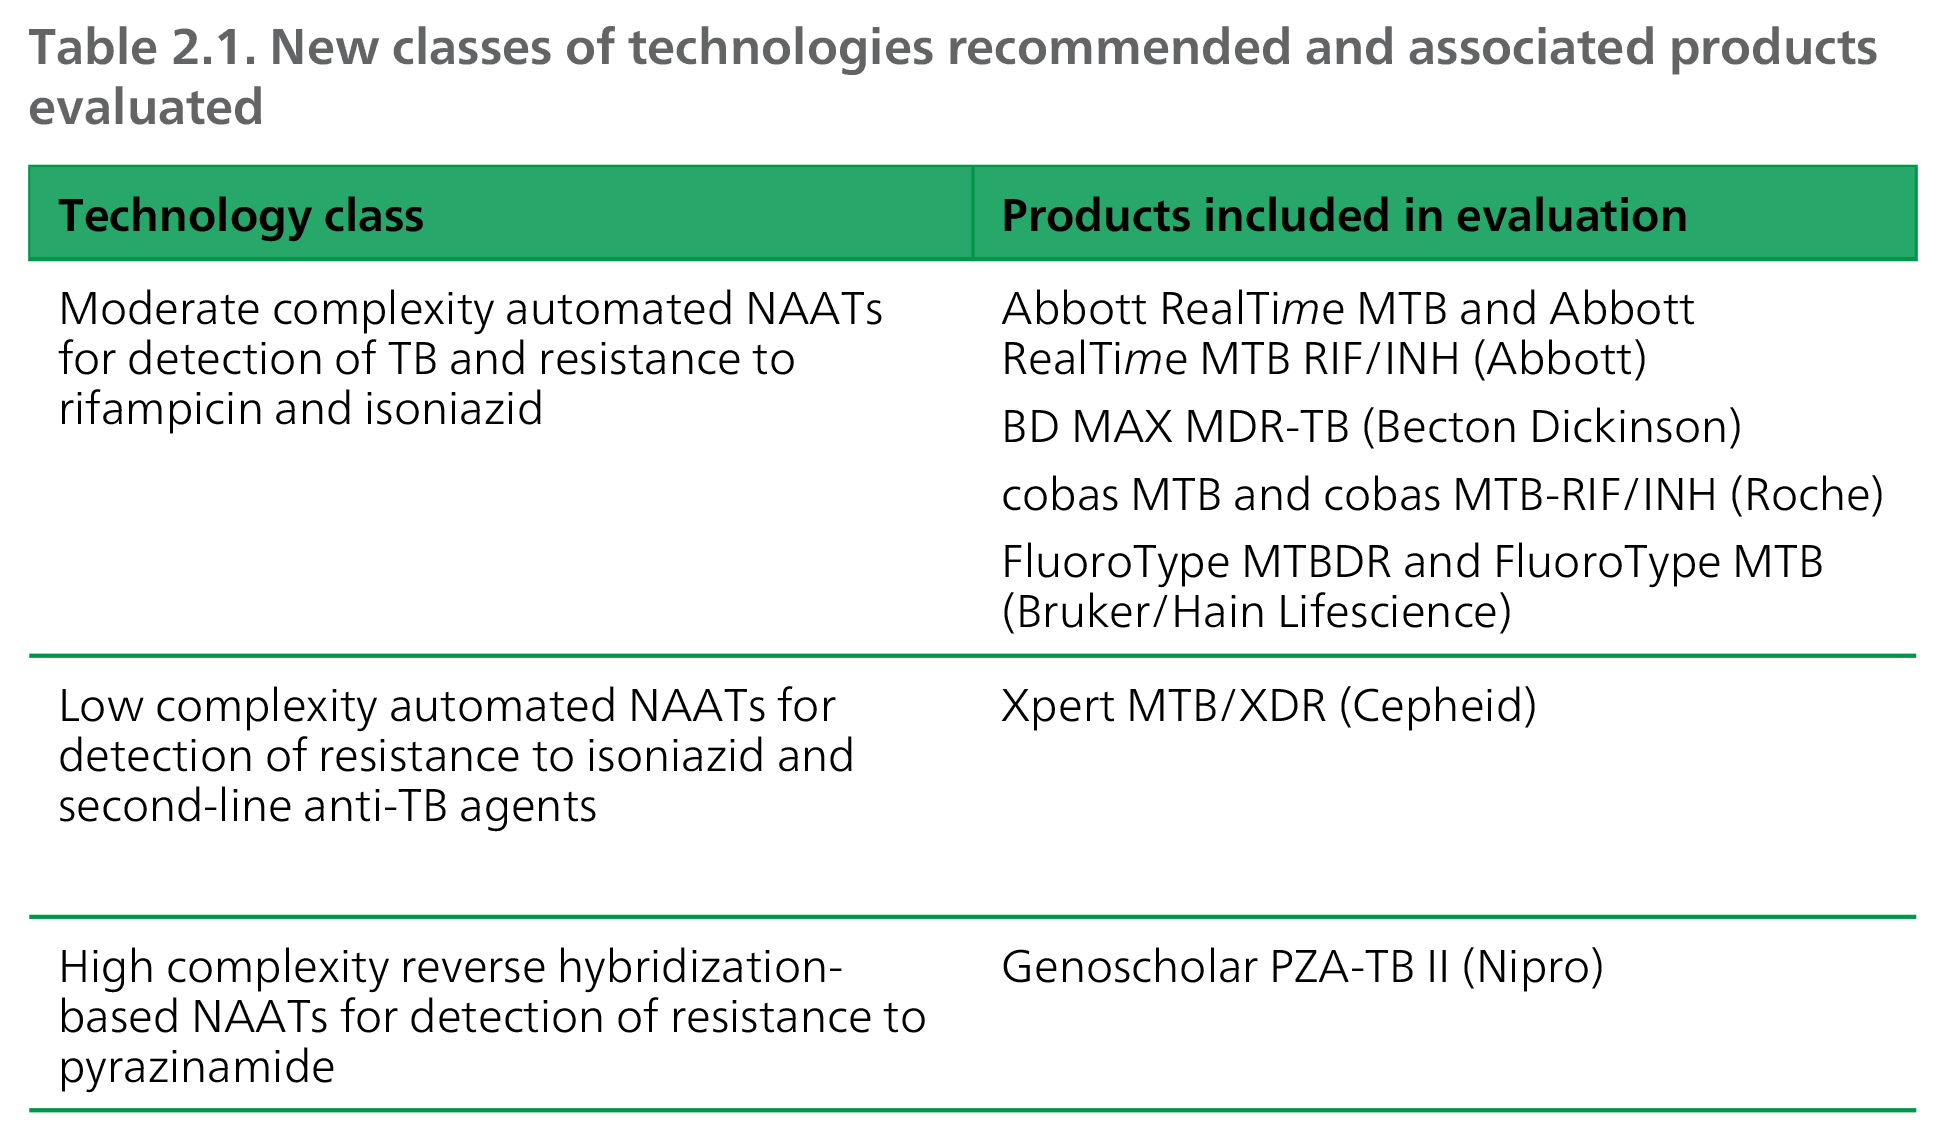 New classes of technologies recommended and associated products evaluated